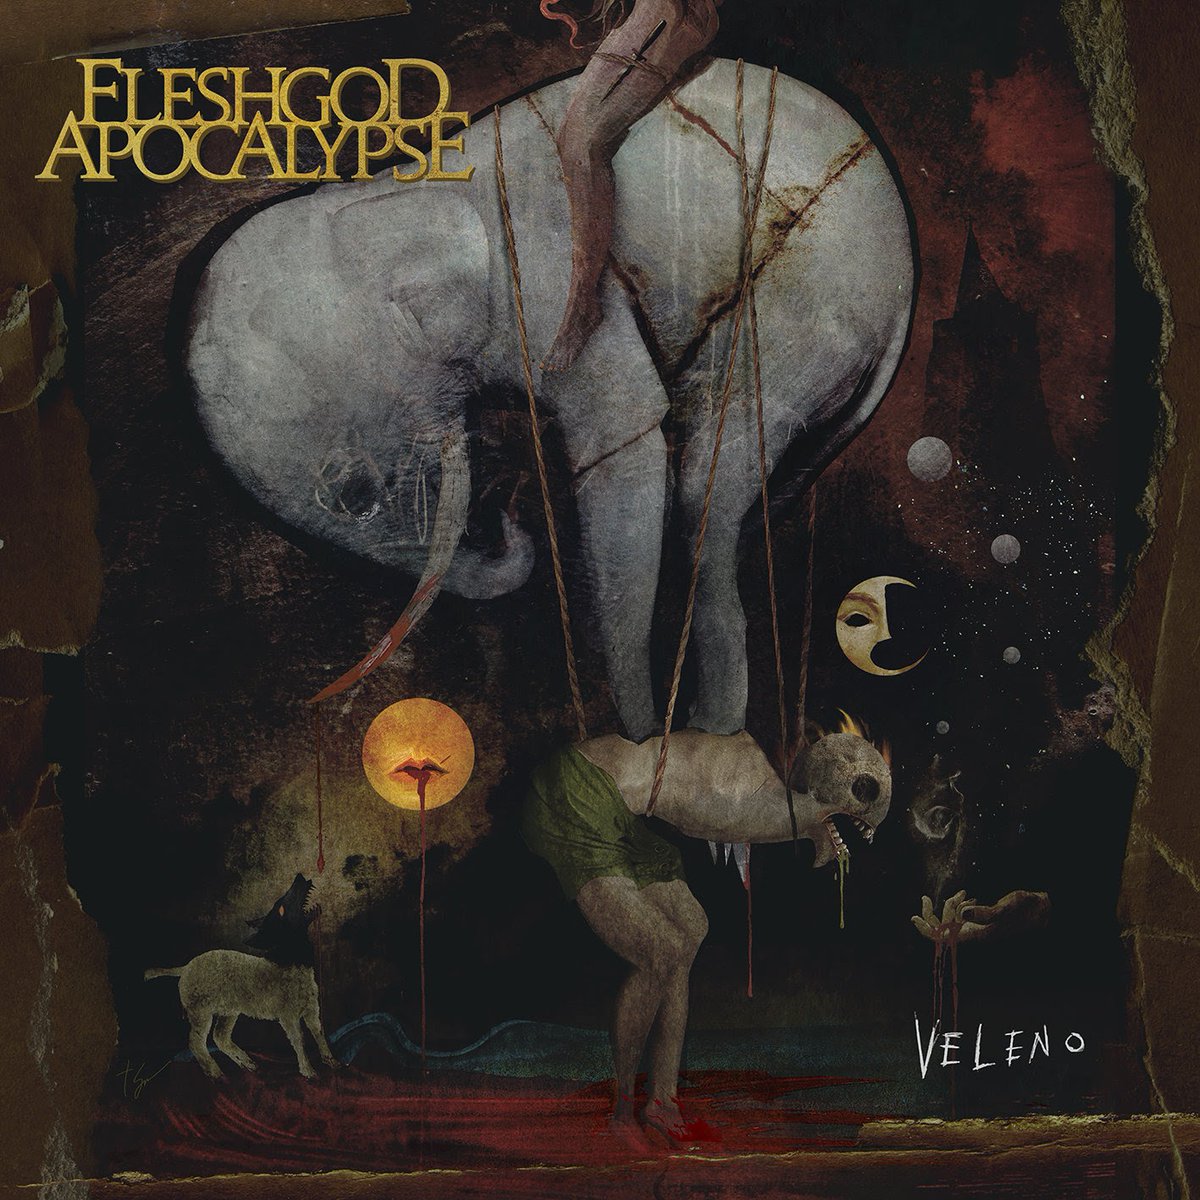 Exactly five years ago, 'Veleno' came out!
🎉🎉🎉

What's your favourite song off it?

#FleshgodApocalypse
#veleno #deathmetal #symphonicdeathmetal #anniversary